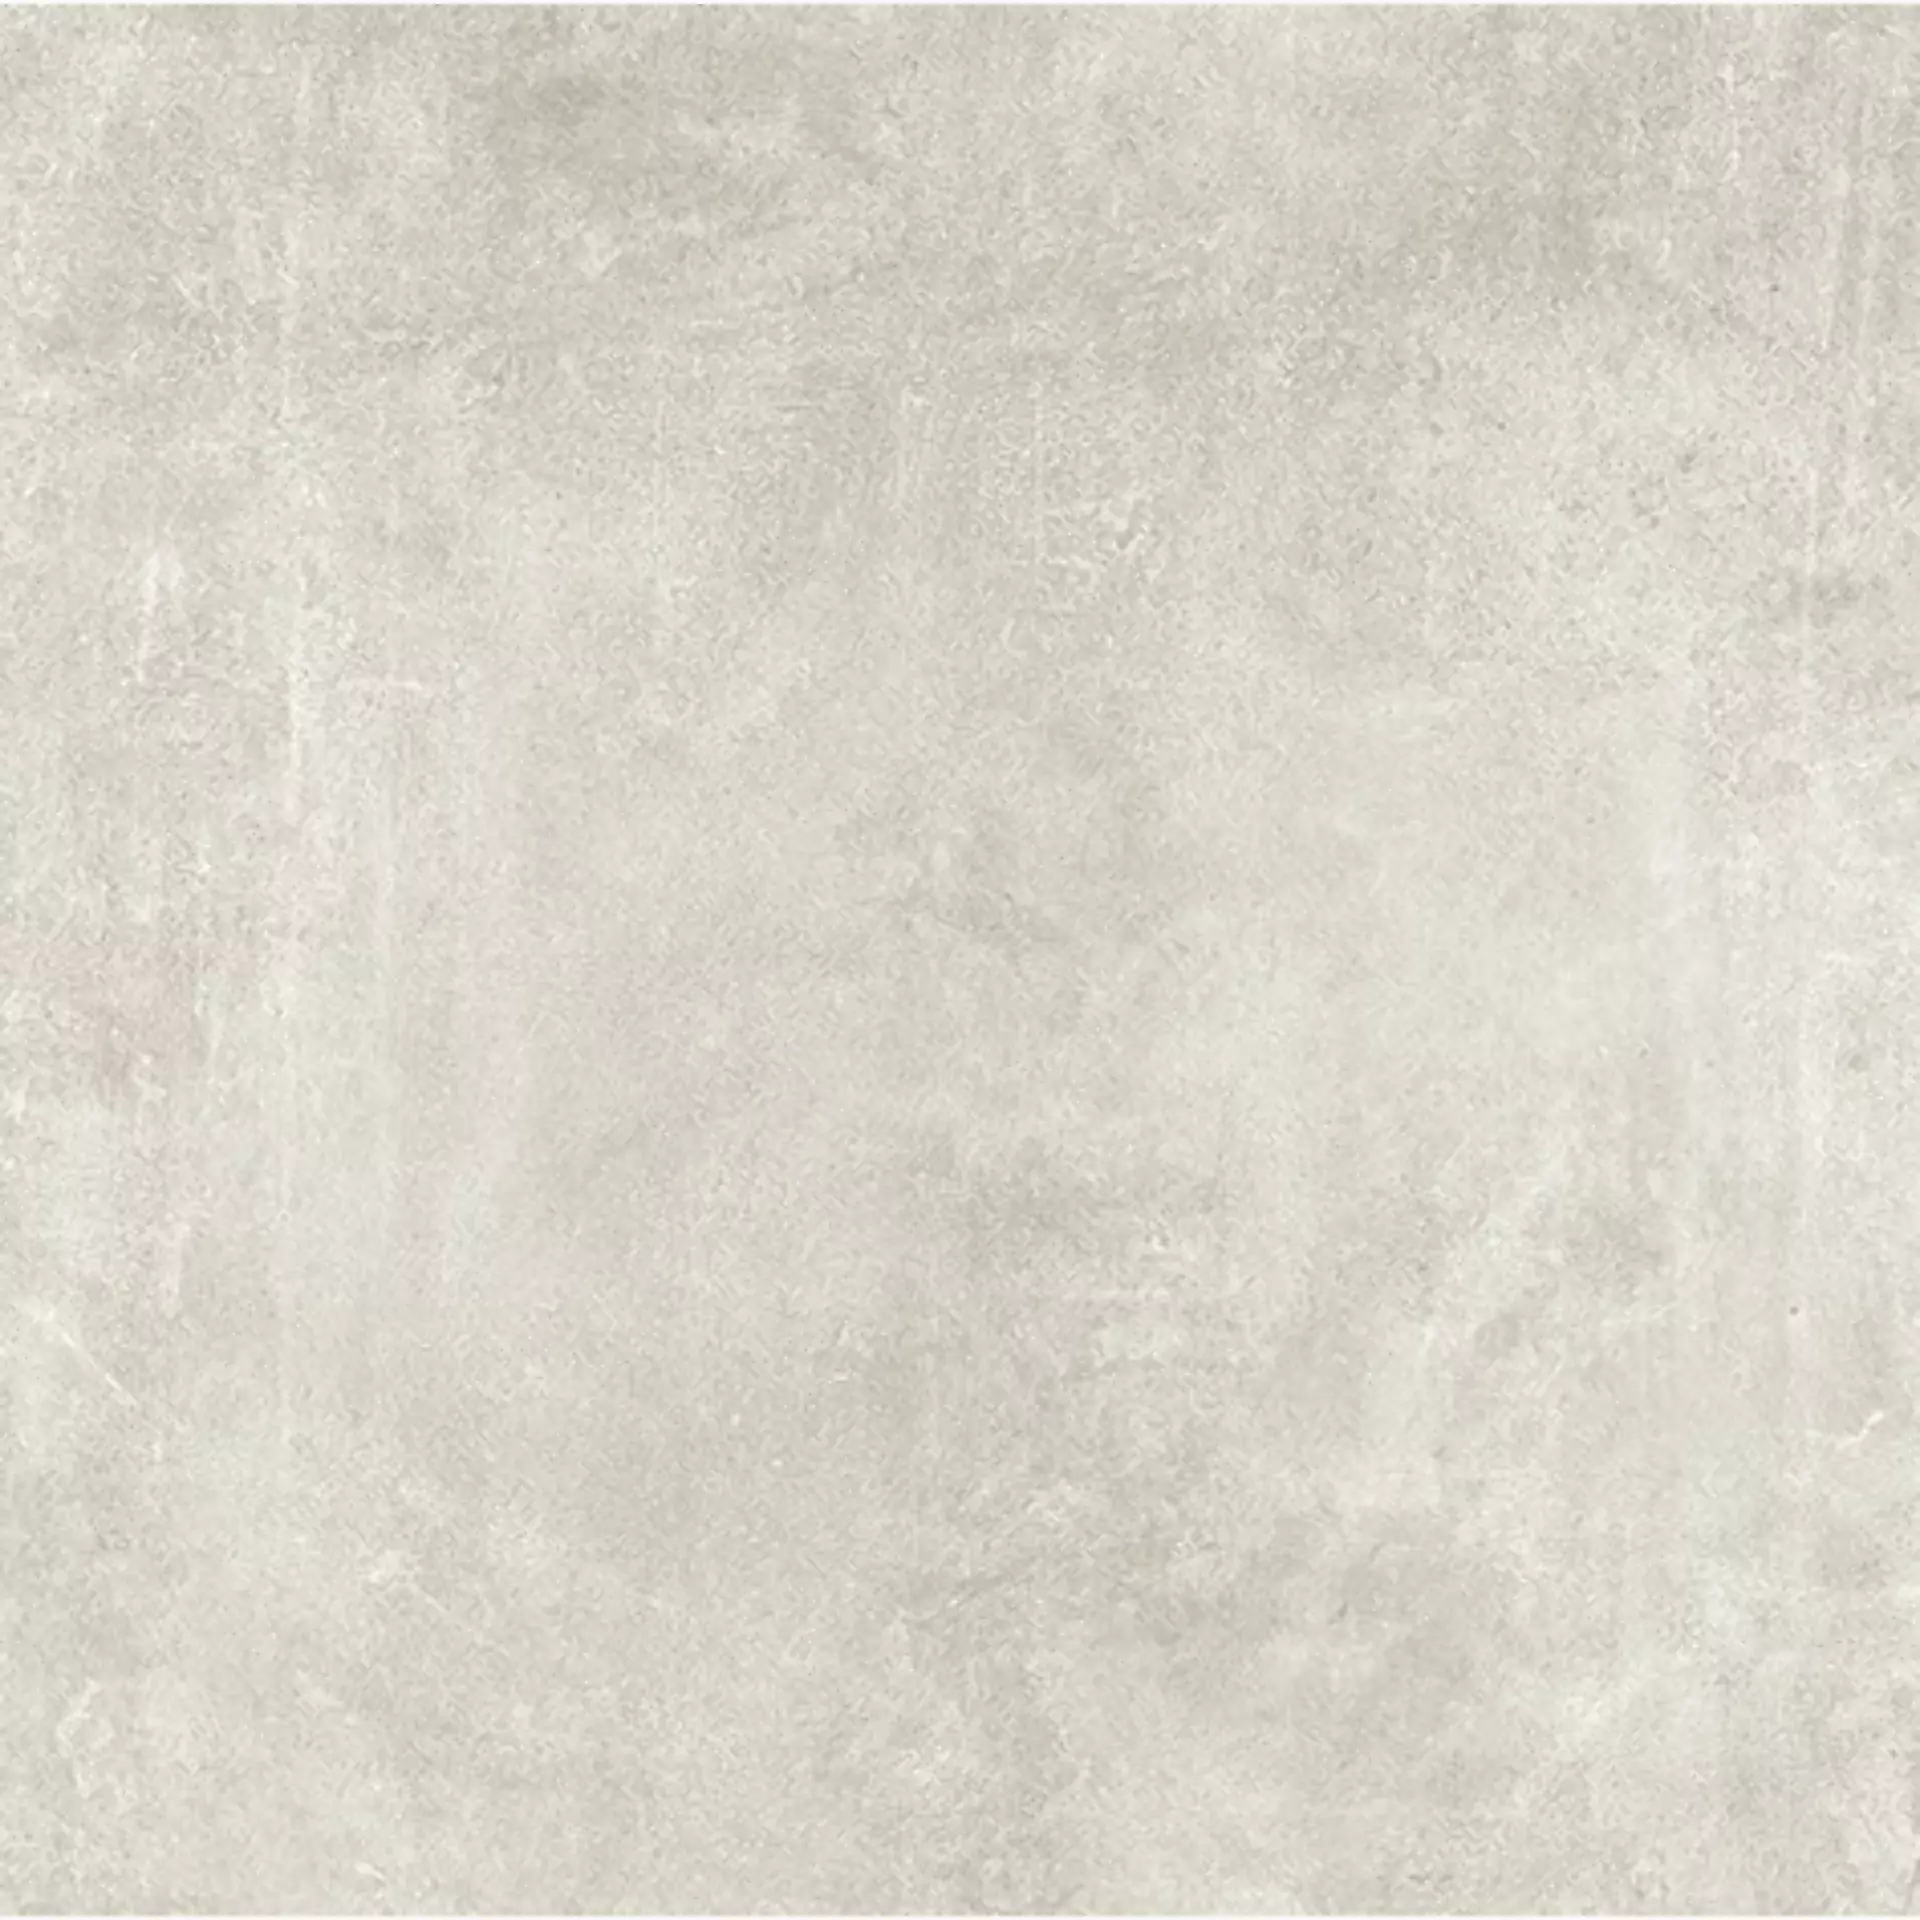 Mirage Glocal Gc 01 Clear Naturale TF85 60x120cm rectified 9mm